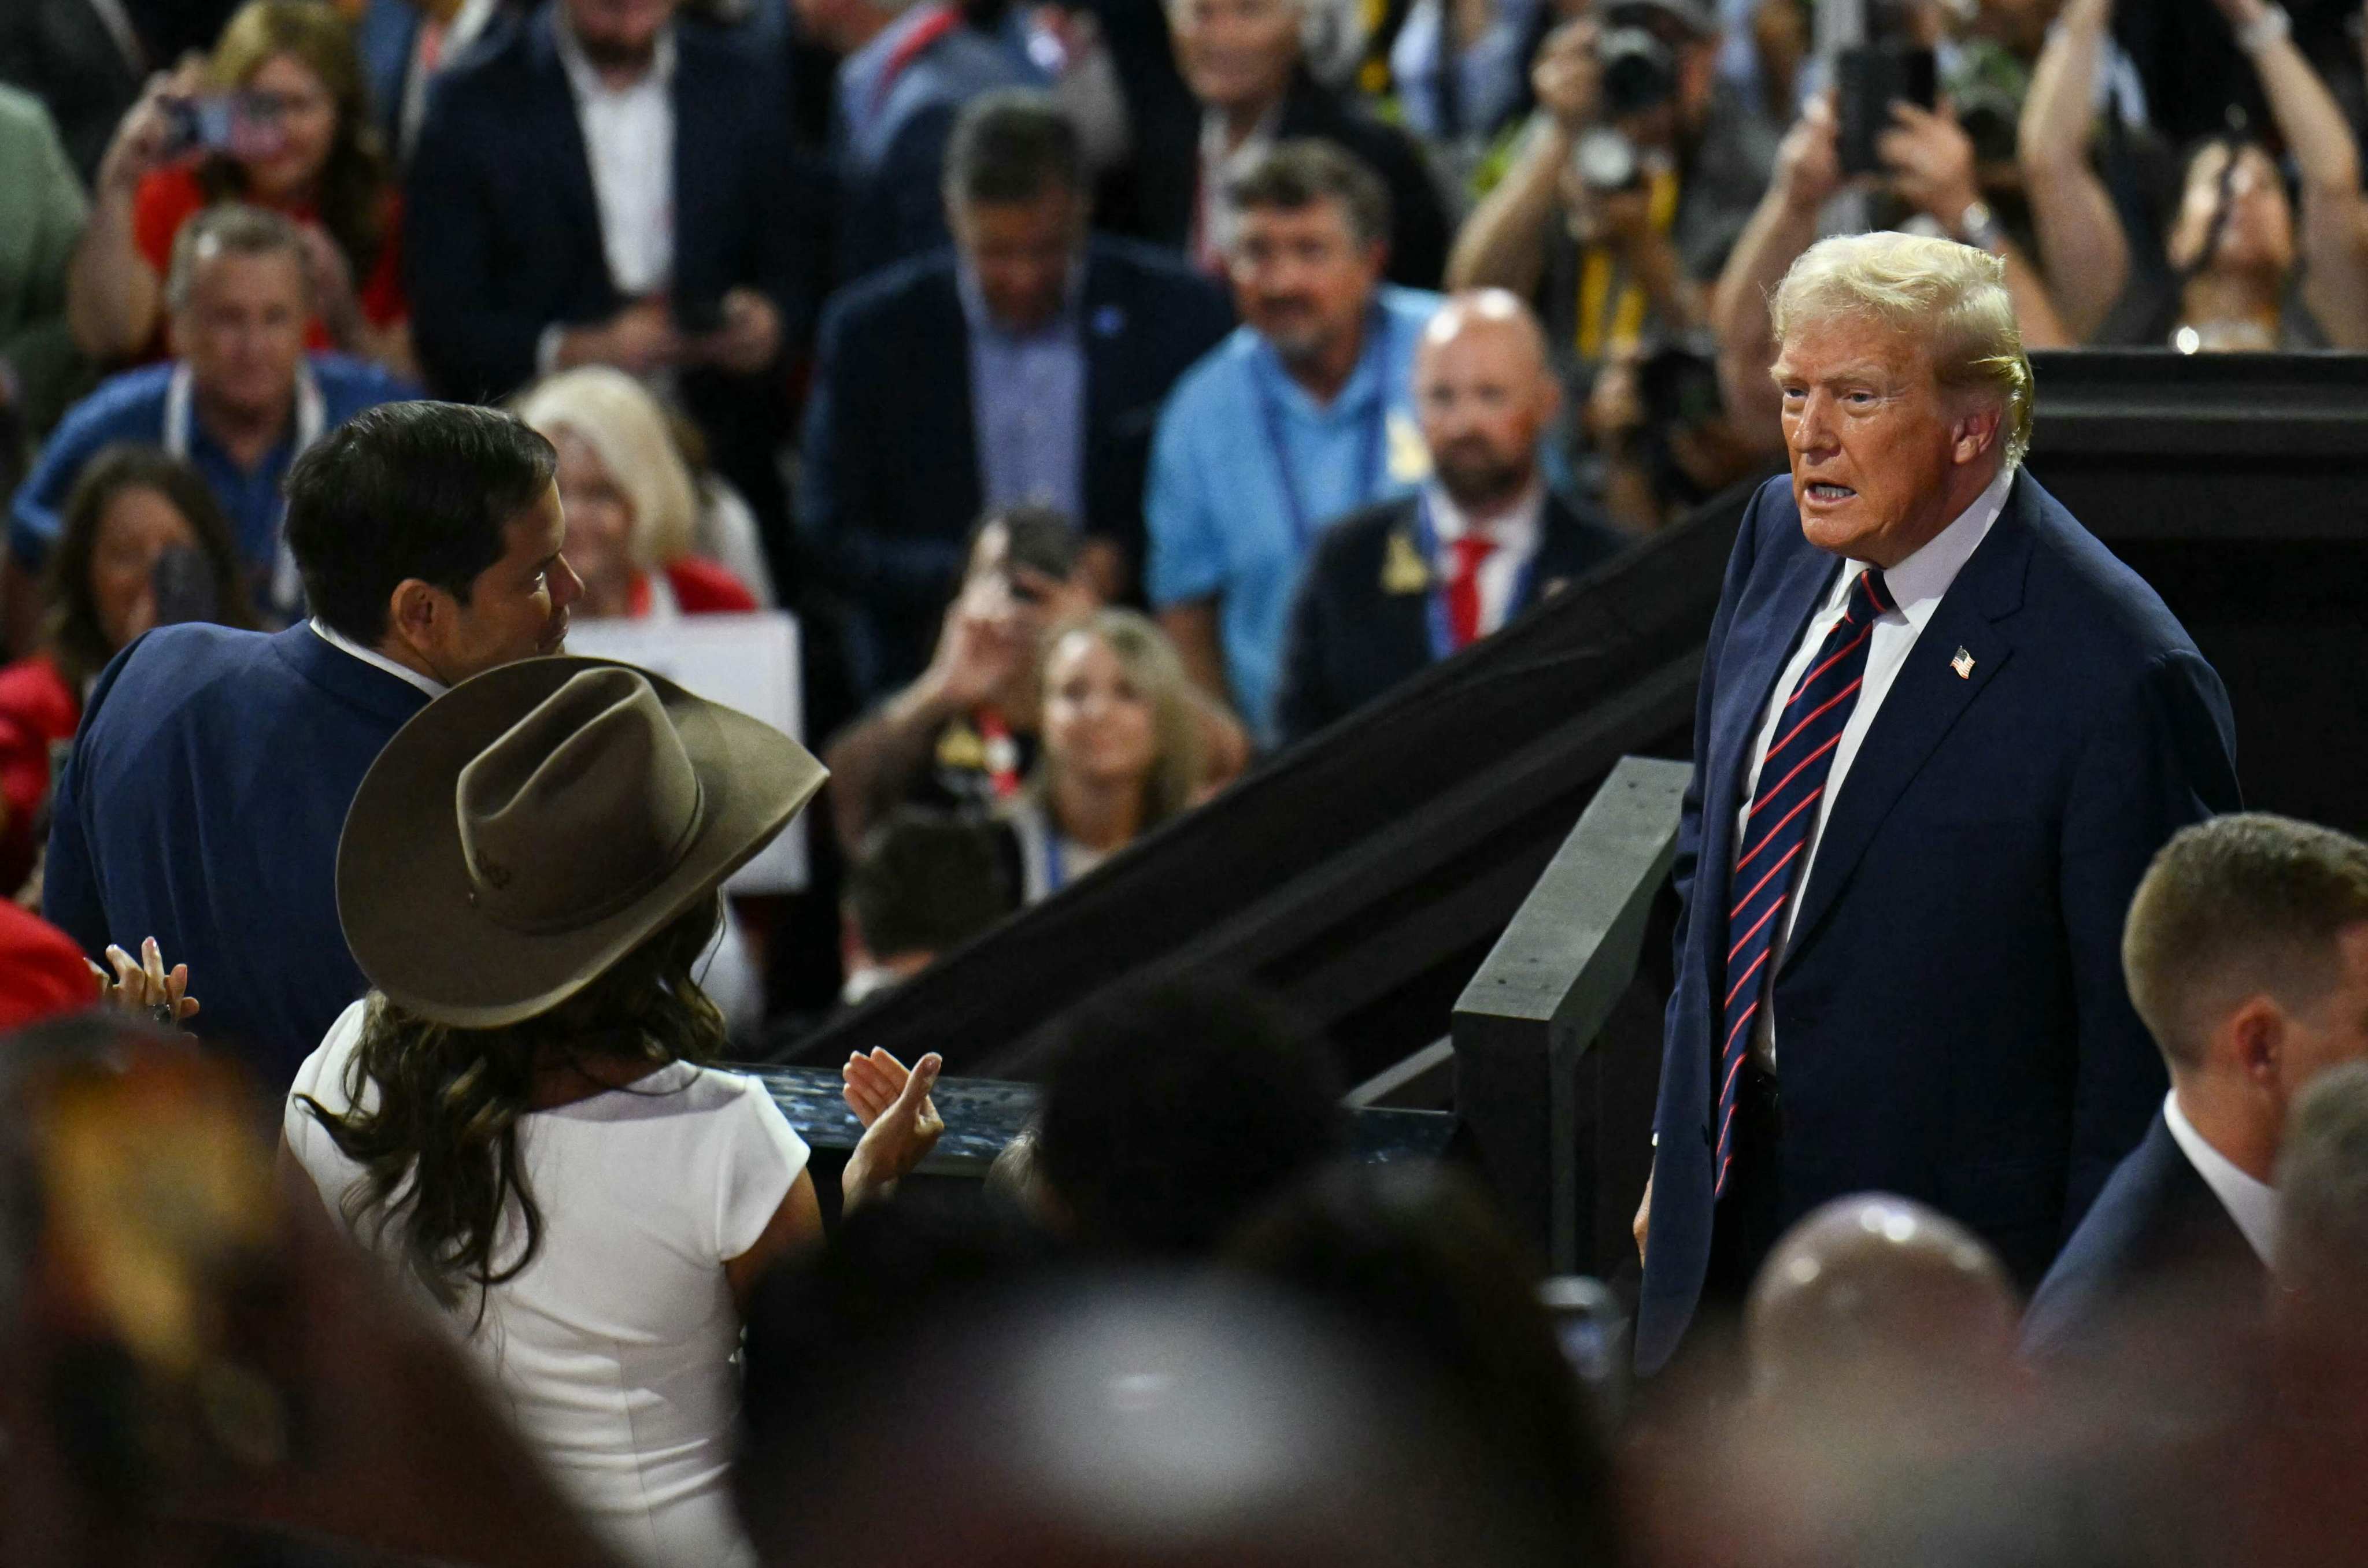 US former president and 2024 Republican presidential candidate Donald Trump looks on during the third day of the Republican National Convention in Milwaukee, Wisconsin on July 17, days after surviving an assassination attempt. Photo: AFP